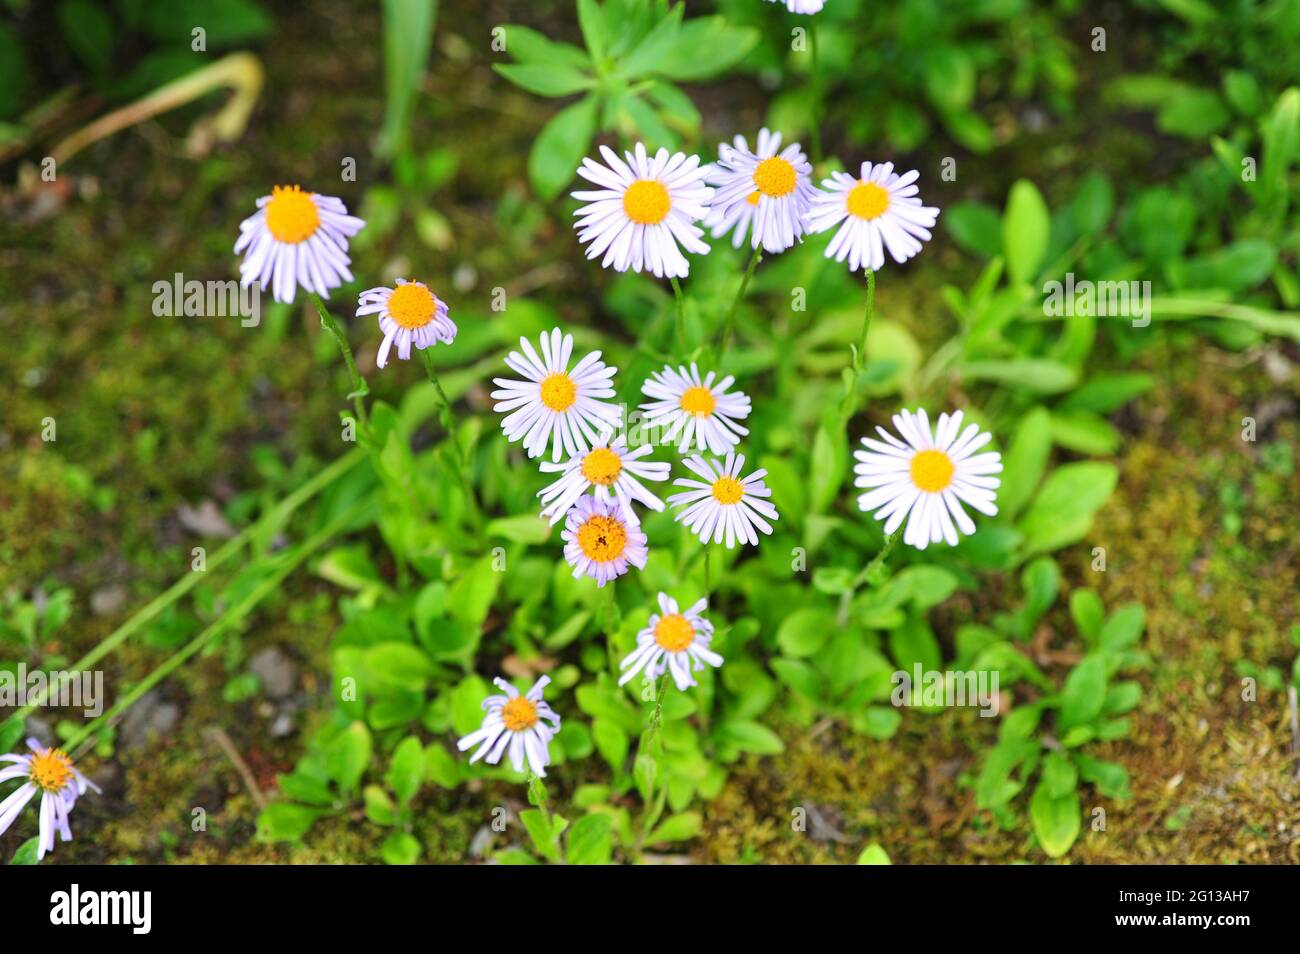 Alpine aster (Aster alpinus) is a perennial herb native to Europe mountains. Stock Photo